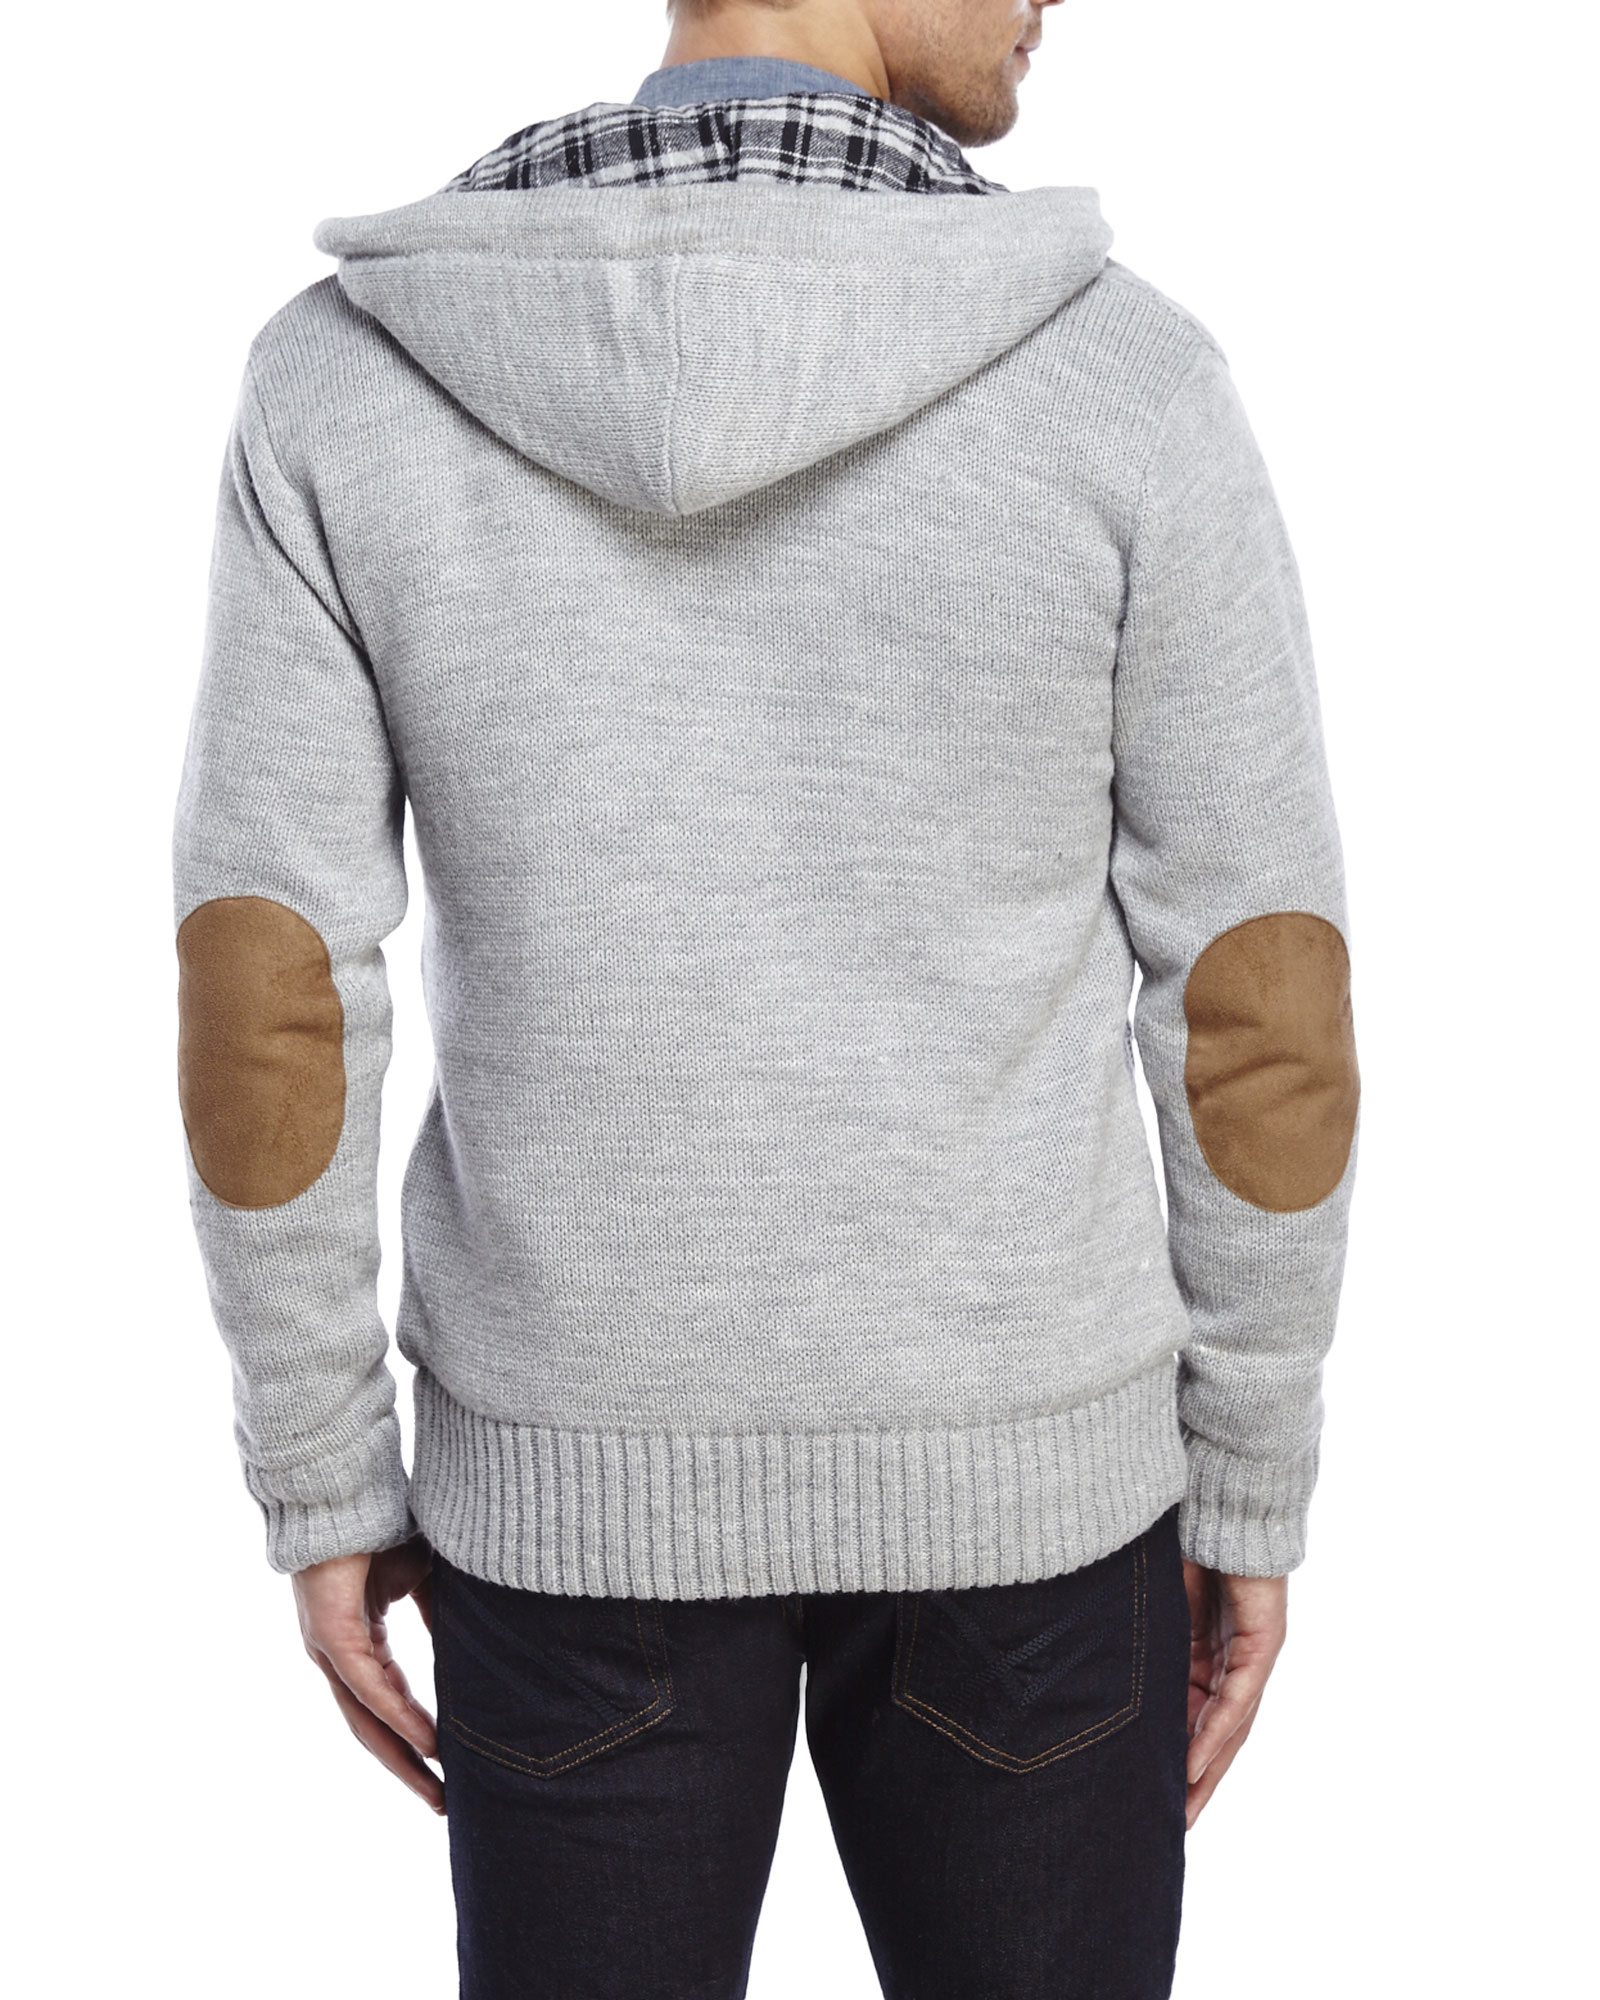 Lyst - American Stitch Cable Knit Hooded Cardigan in Gray for Men